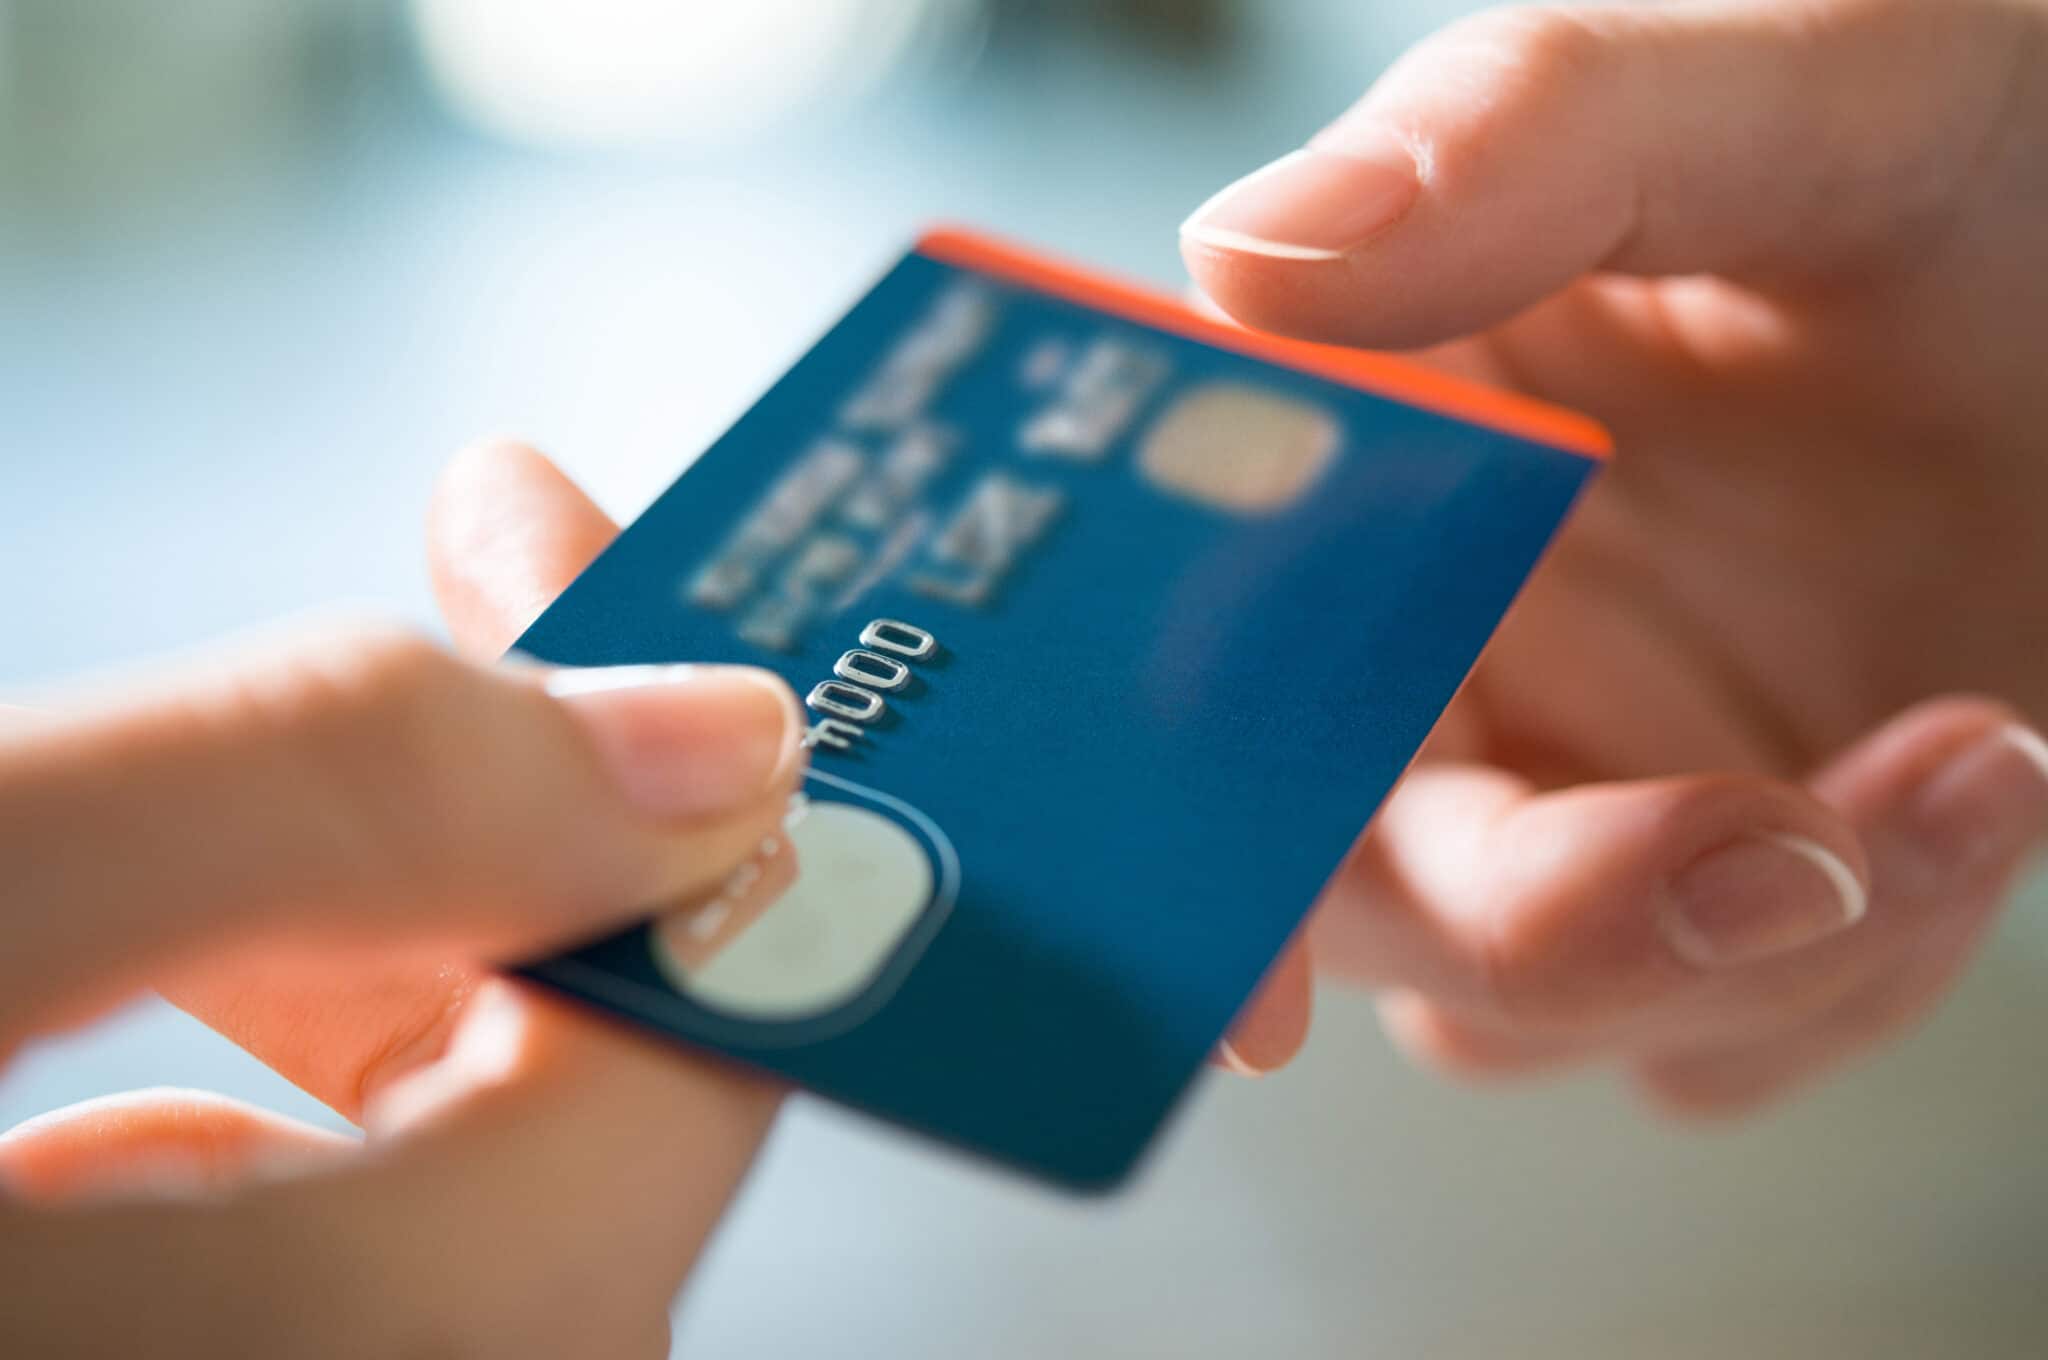 Credit card debt soars in Georgia: Here's how much the average person owes